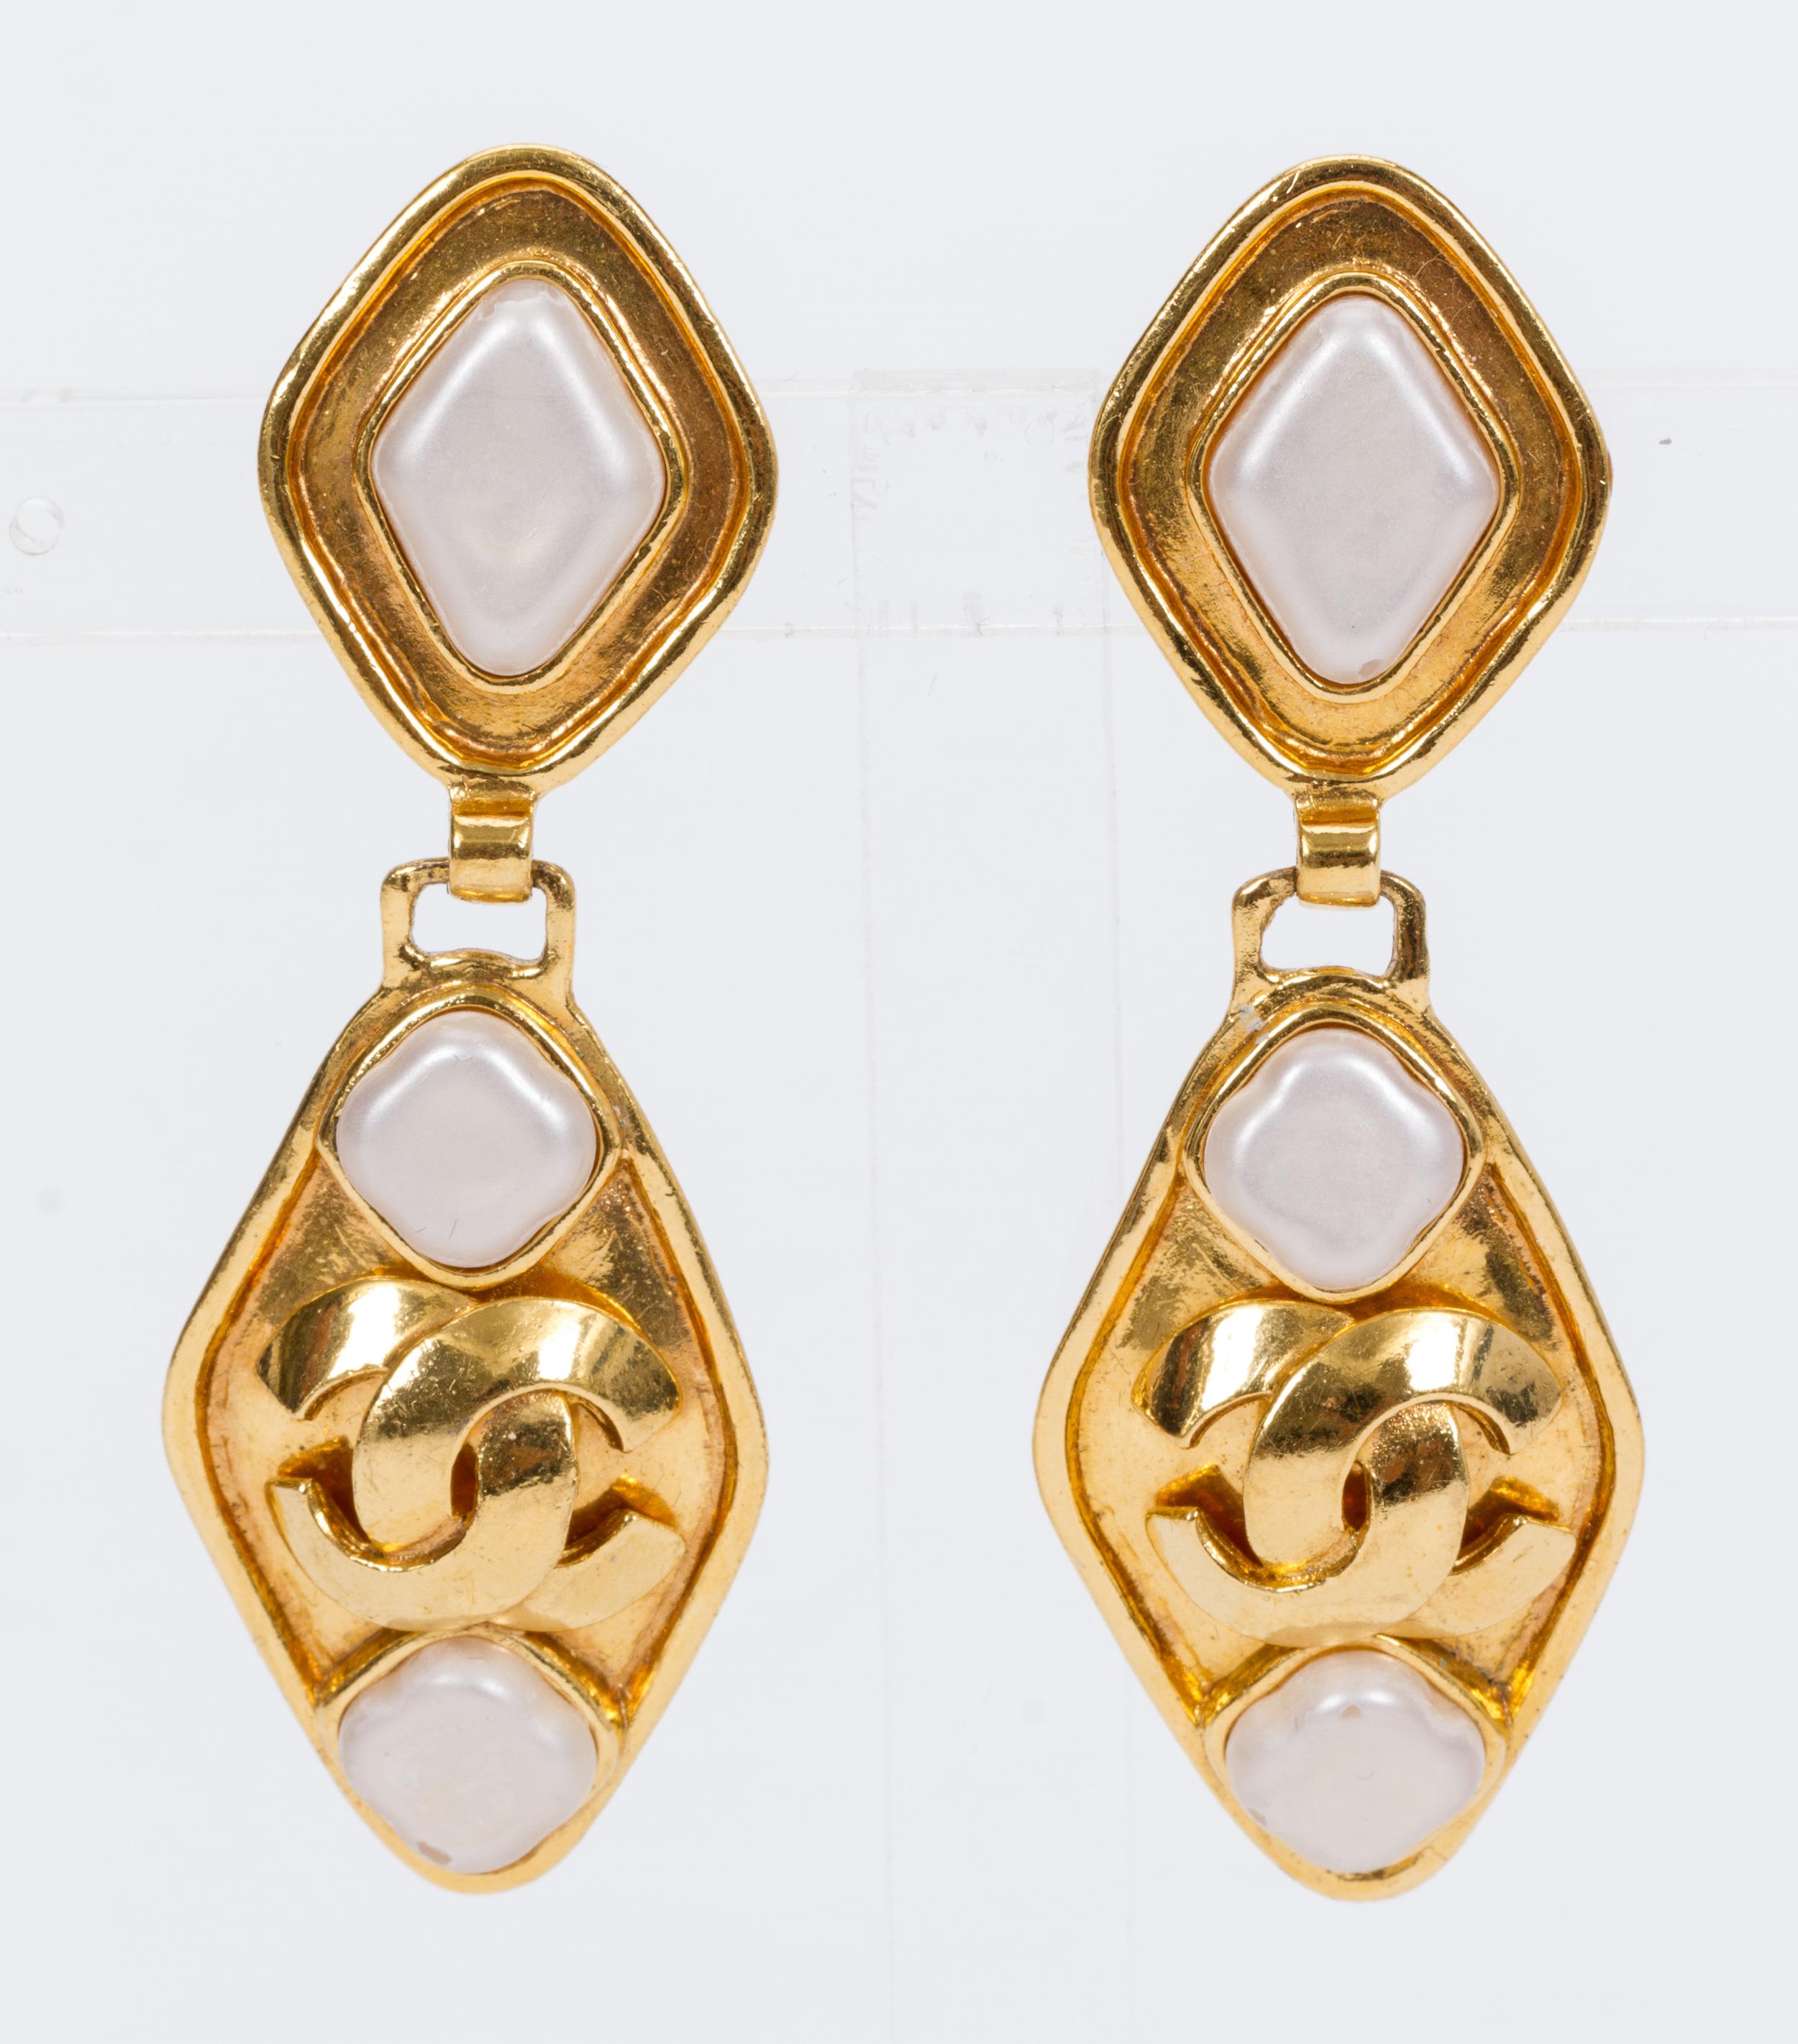 Chanel gold-plated drop clip-back earrings with mother-of-pearl-colored poured glass stones. Comes with original pouch. Minor wear.